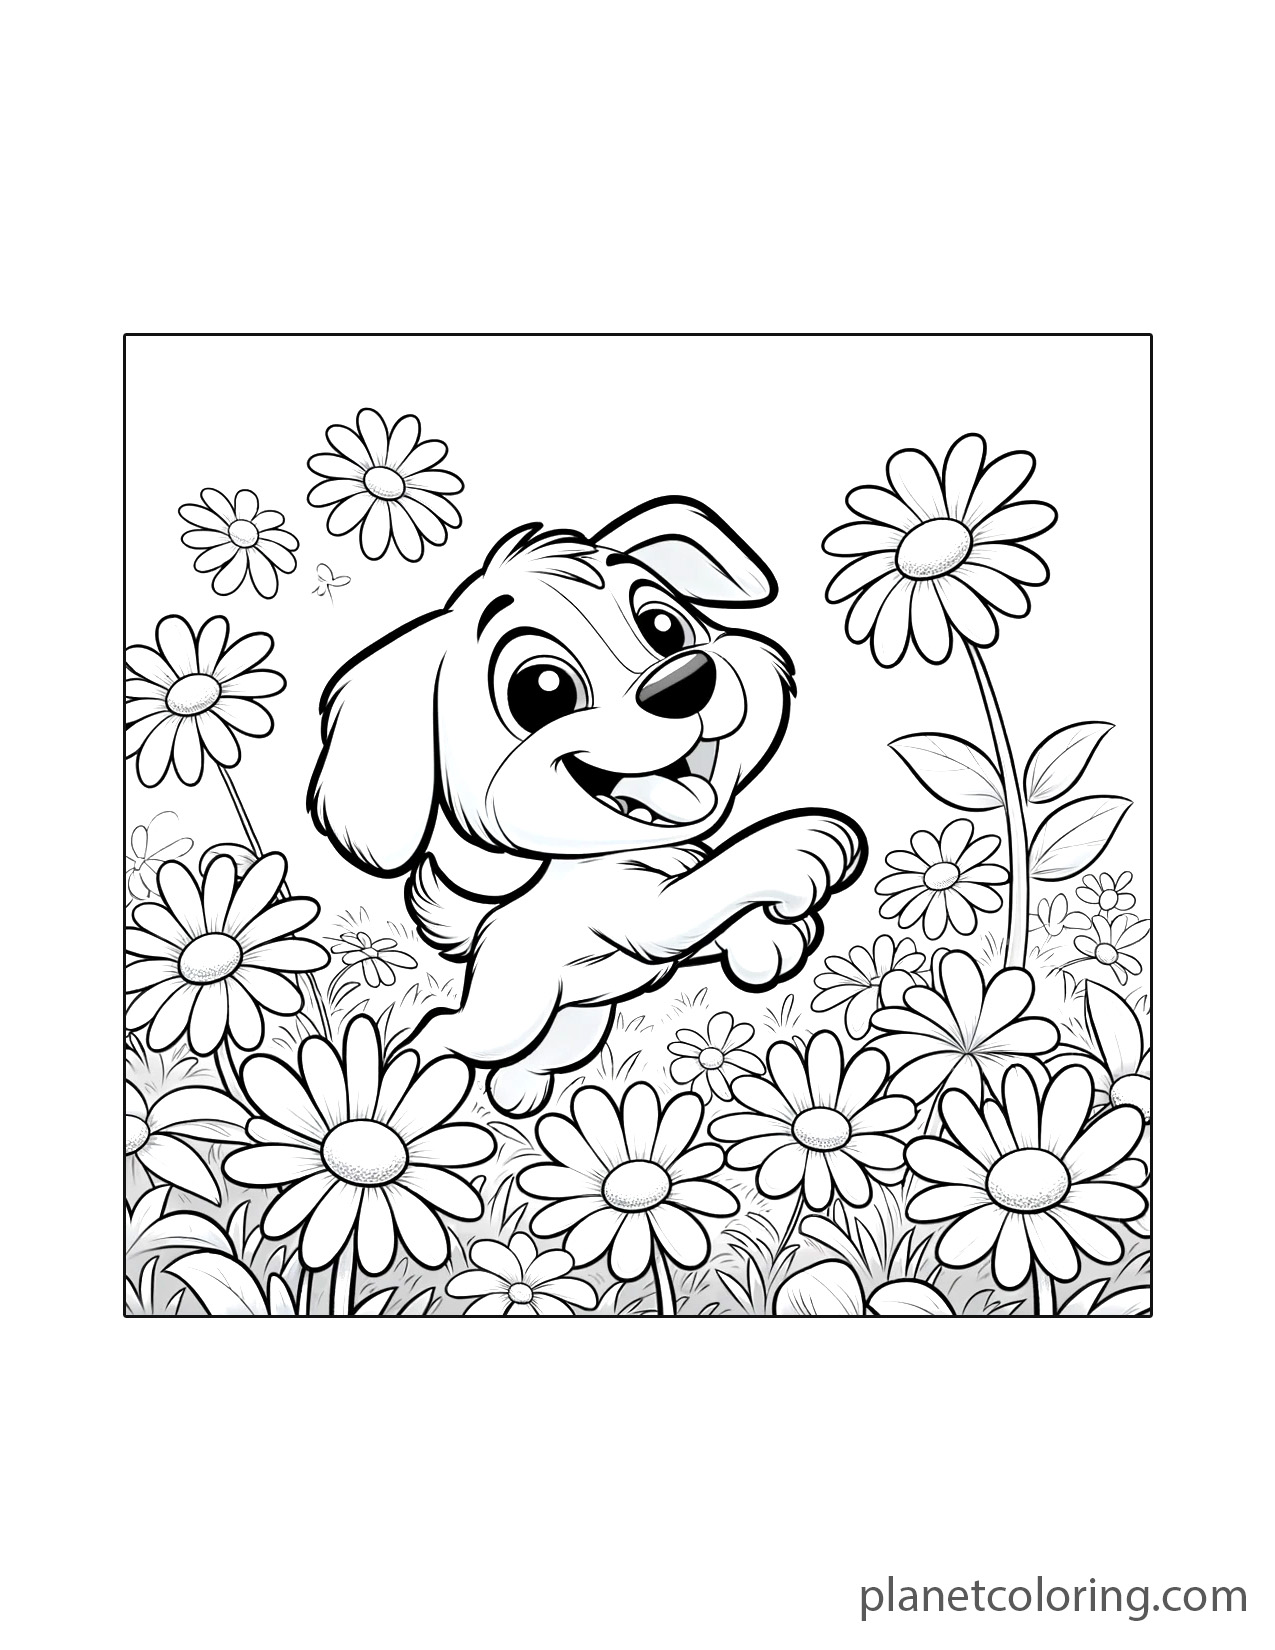 Puppy with flowers